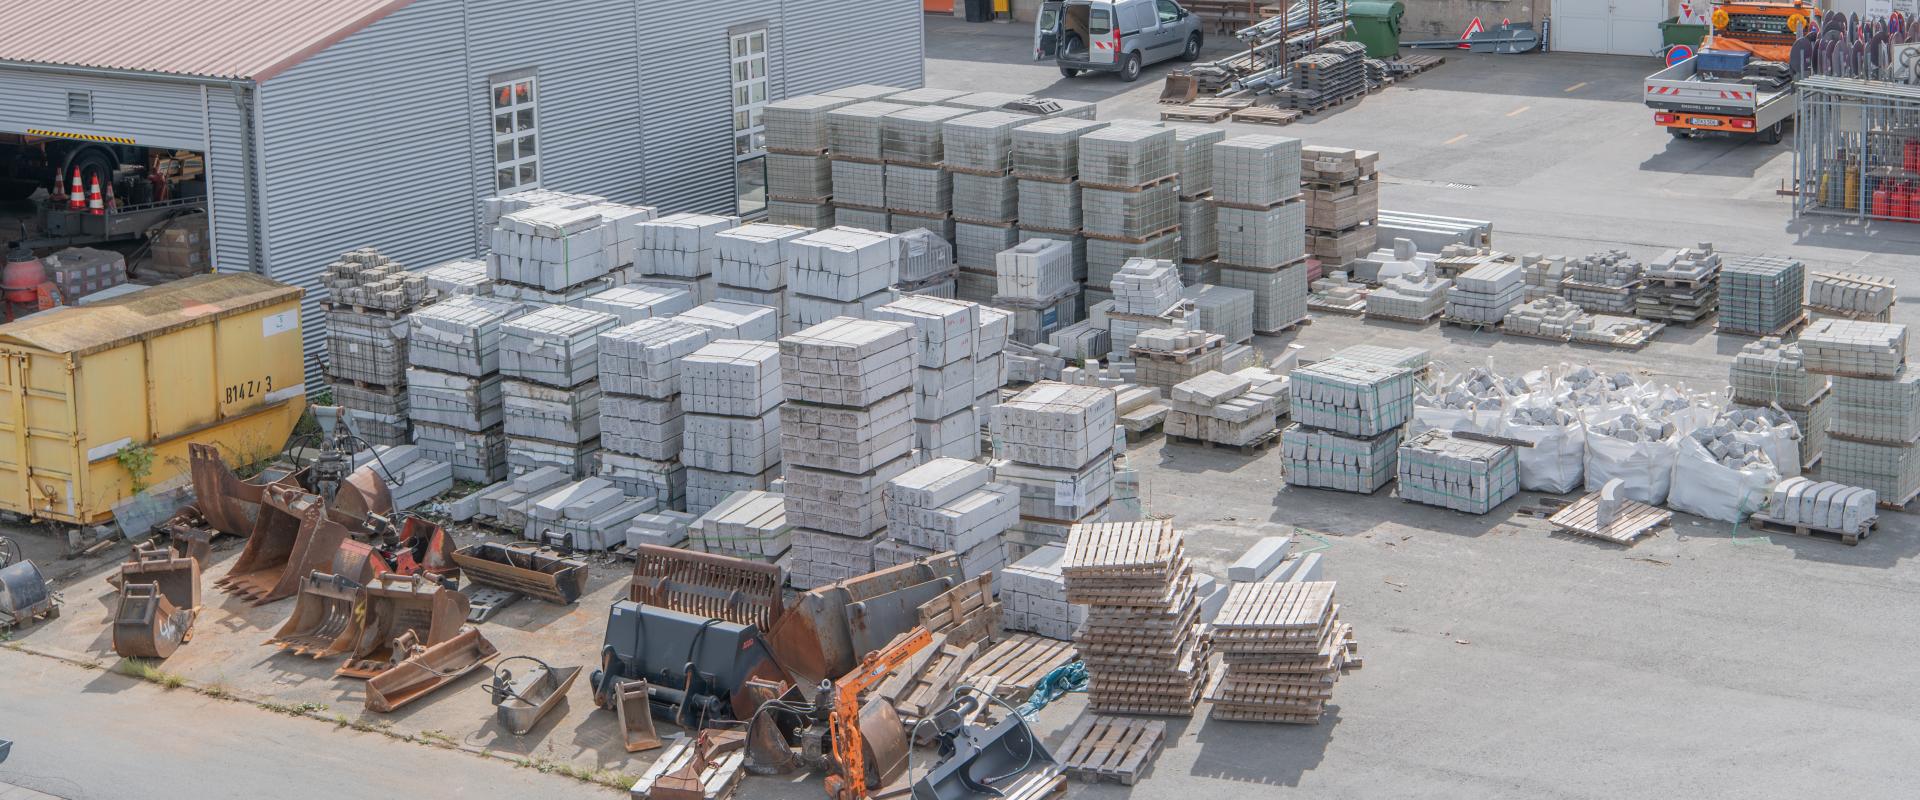 View of the building materials at the building yard